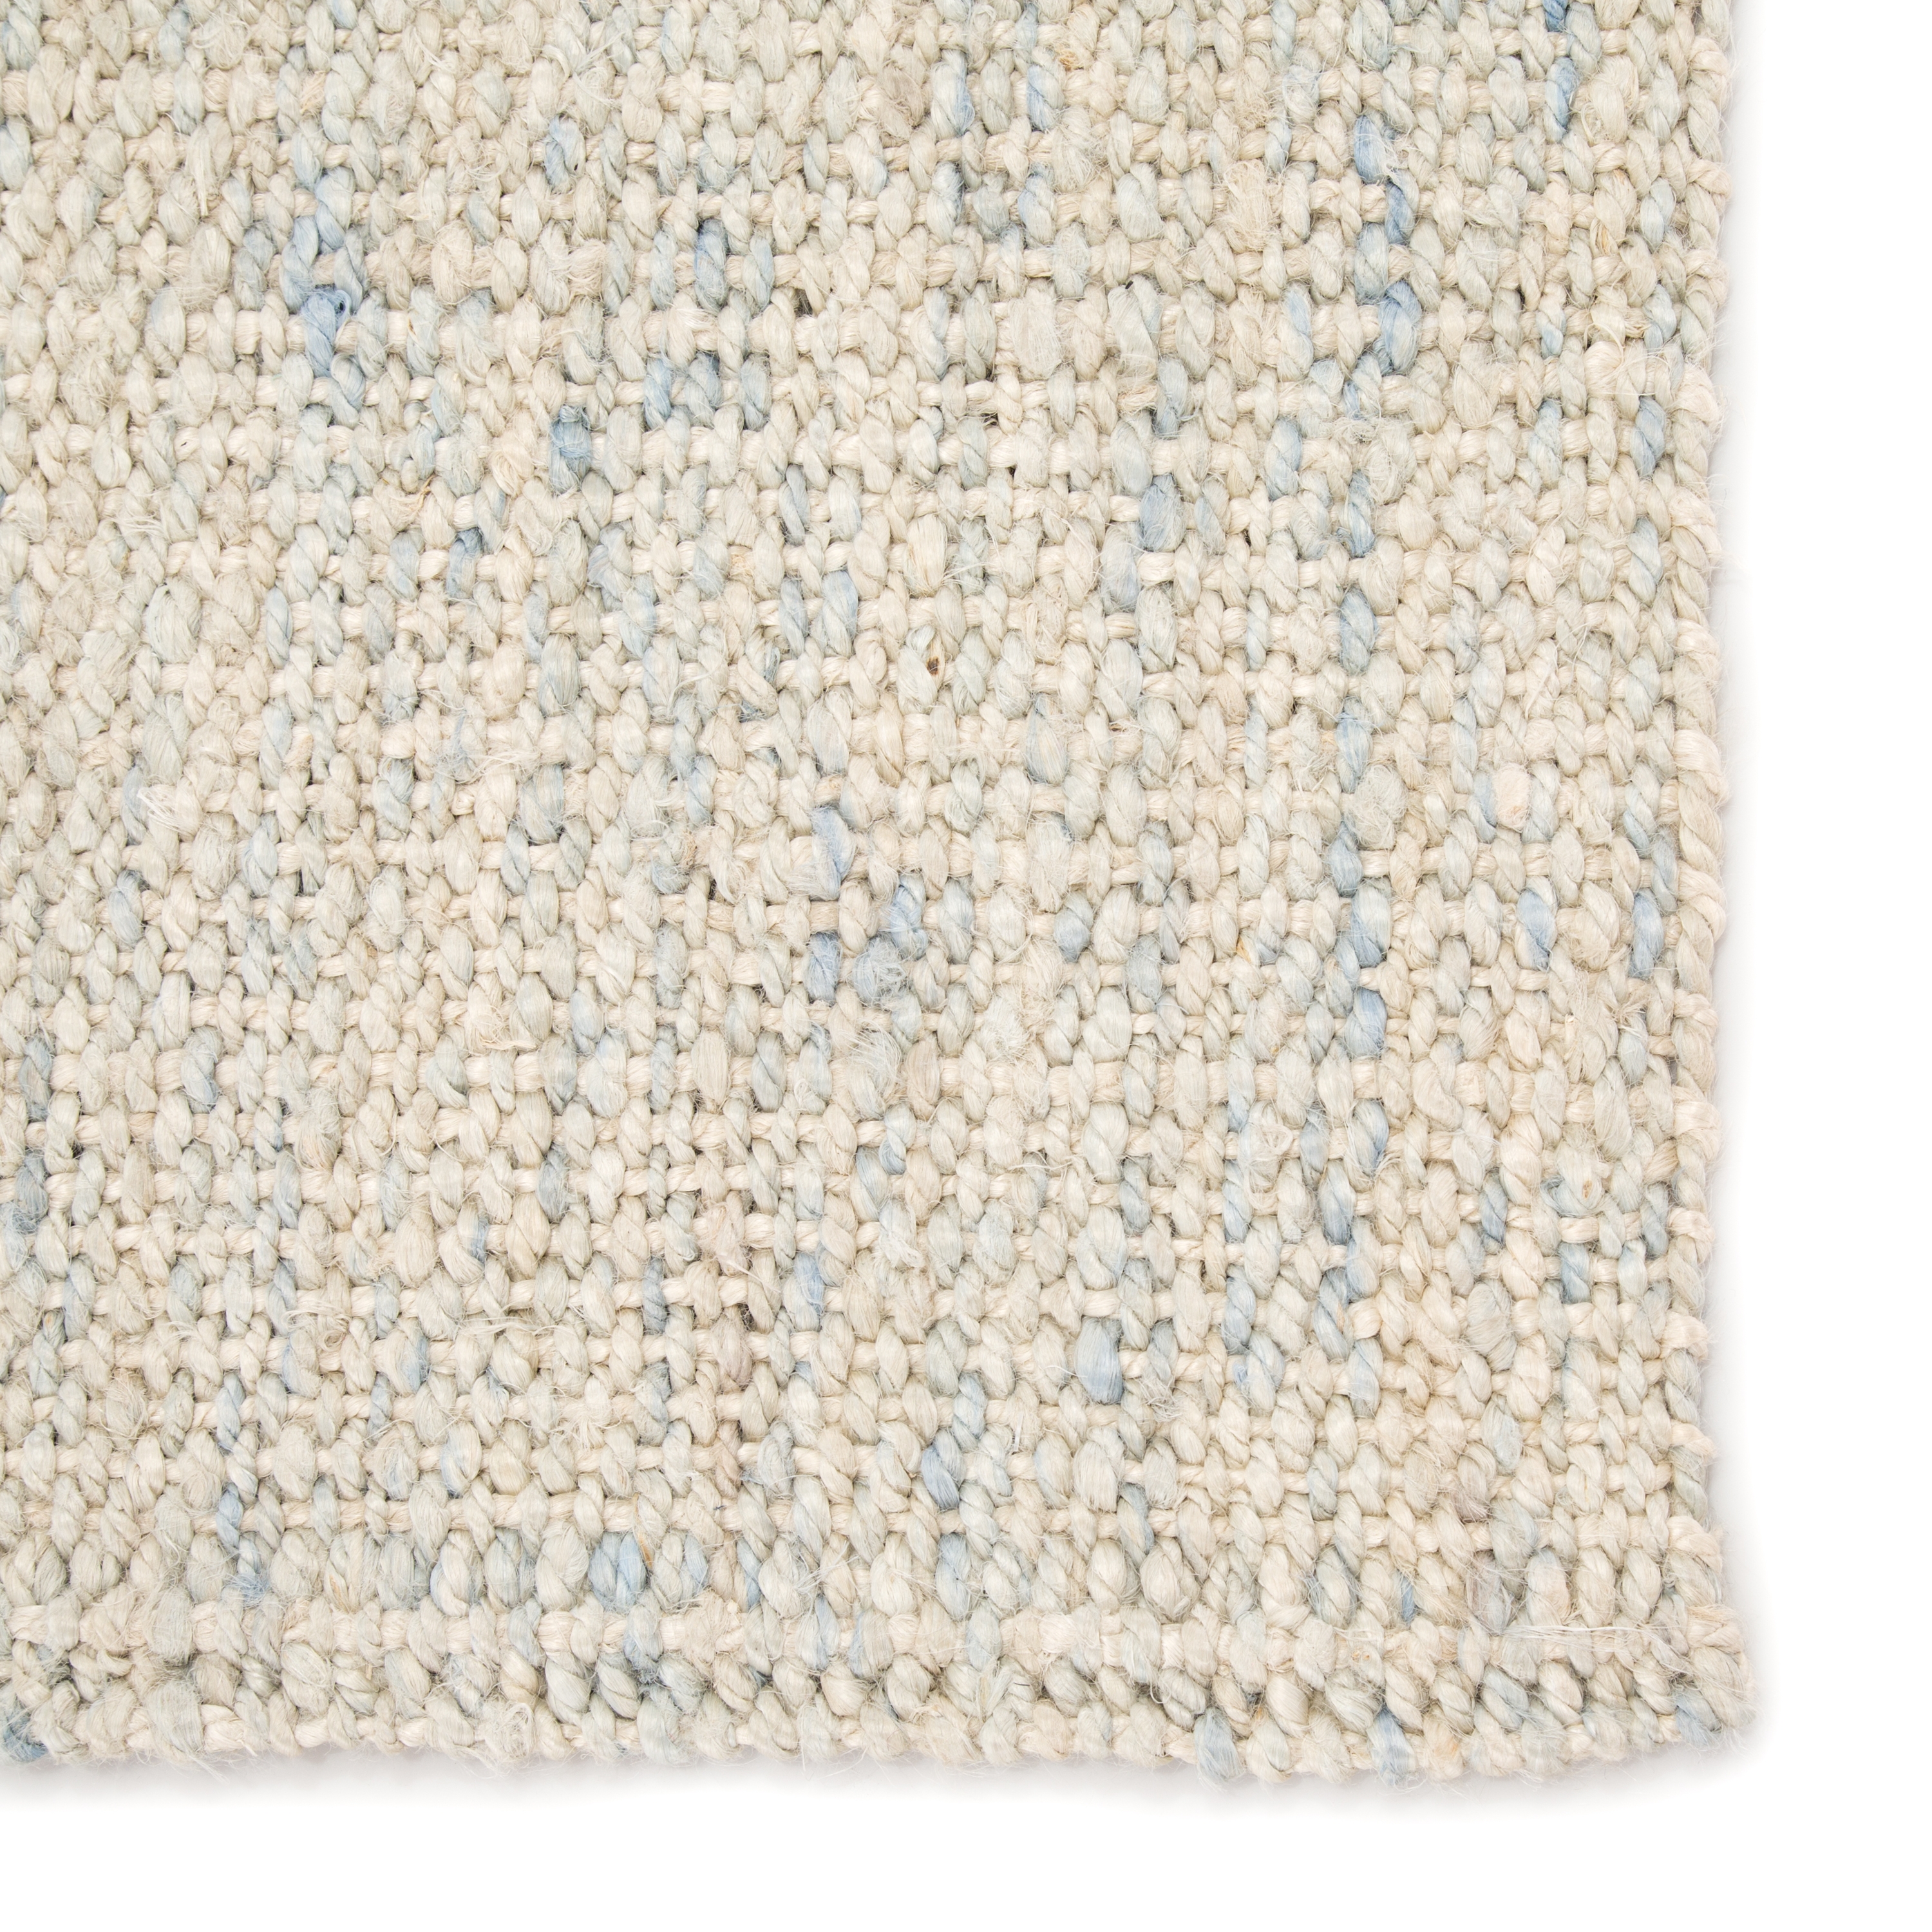 Bluffton Natural Solid Ivory/ Blue Area Rug (9'X12') - Image 3